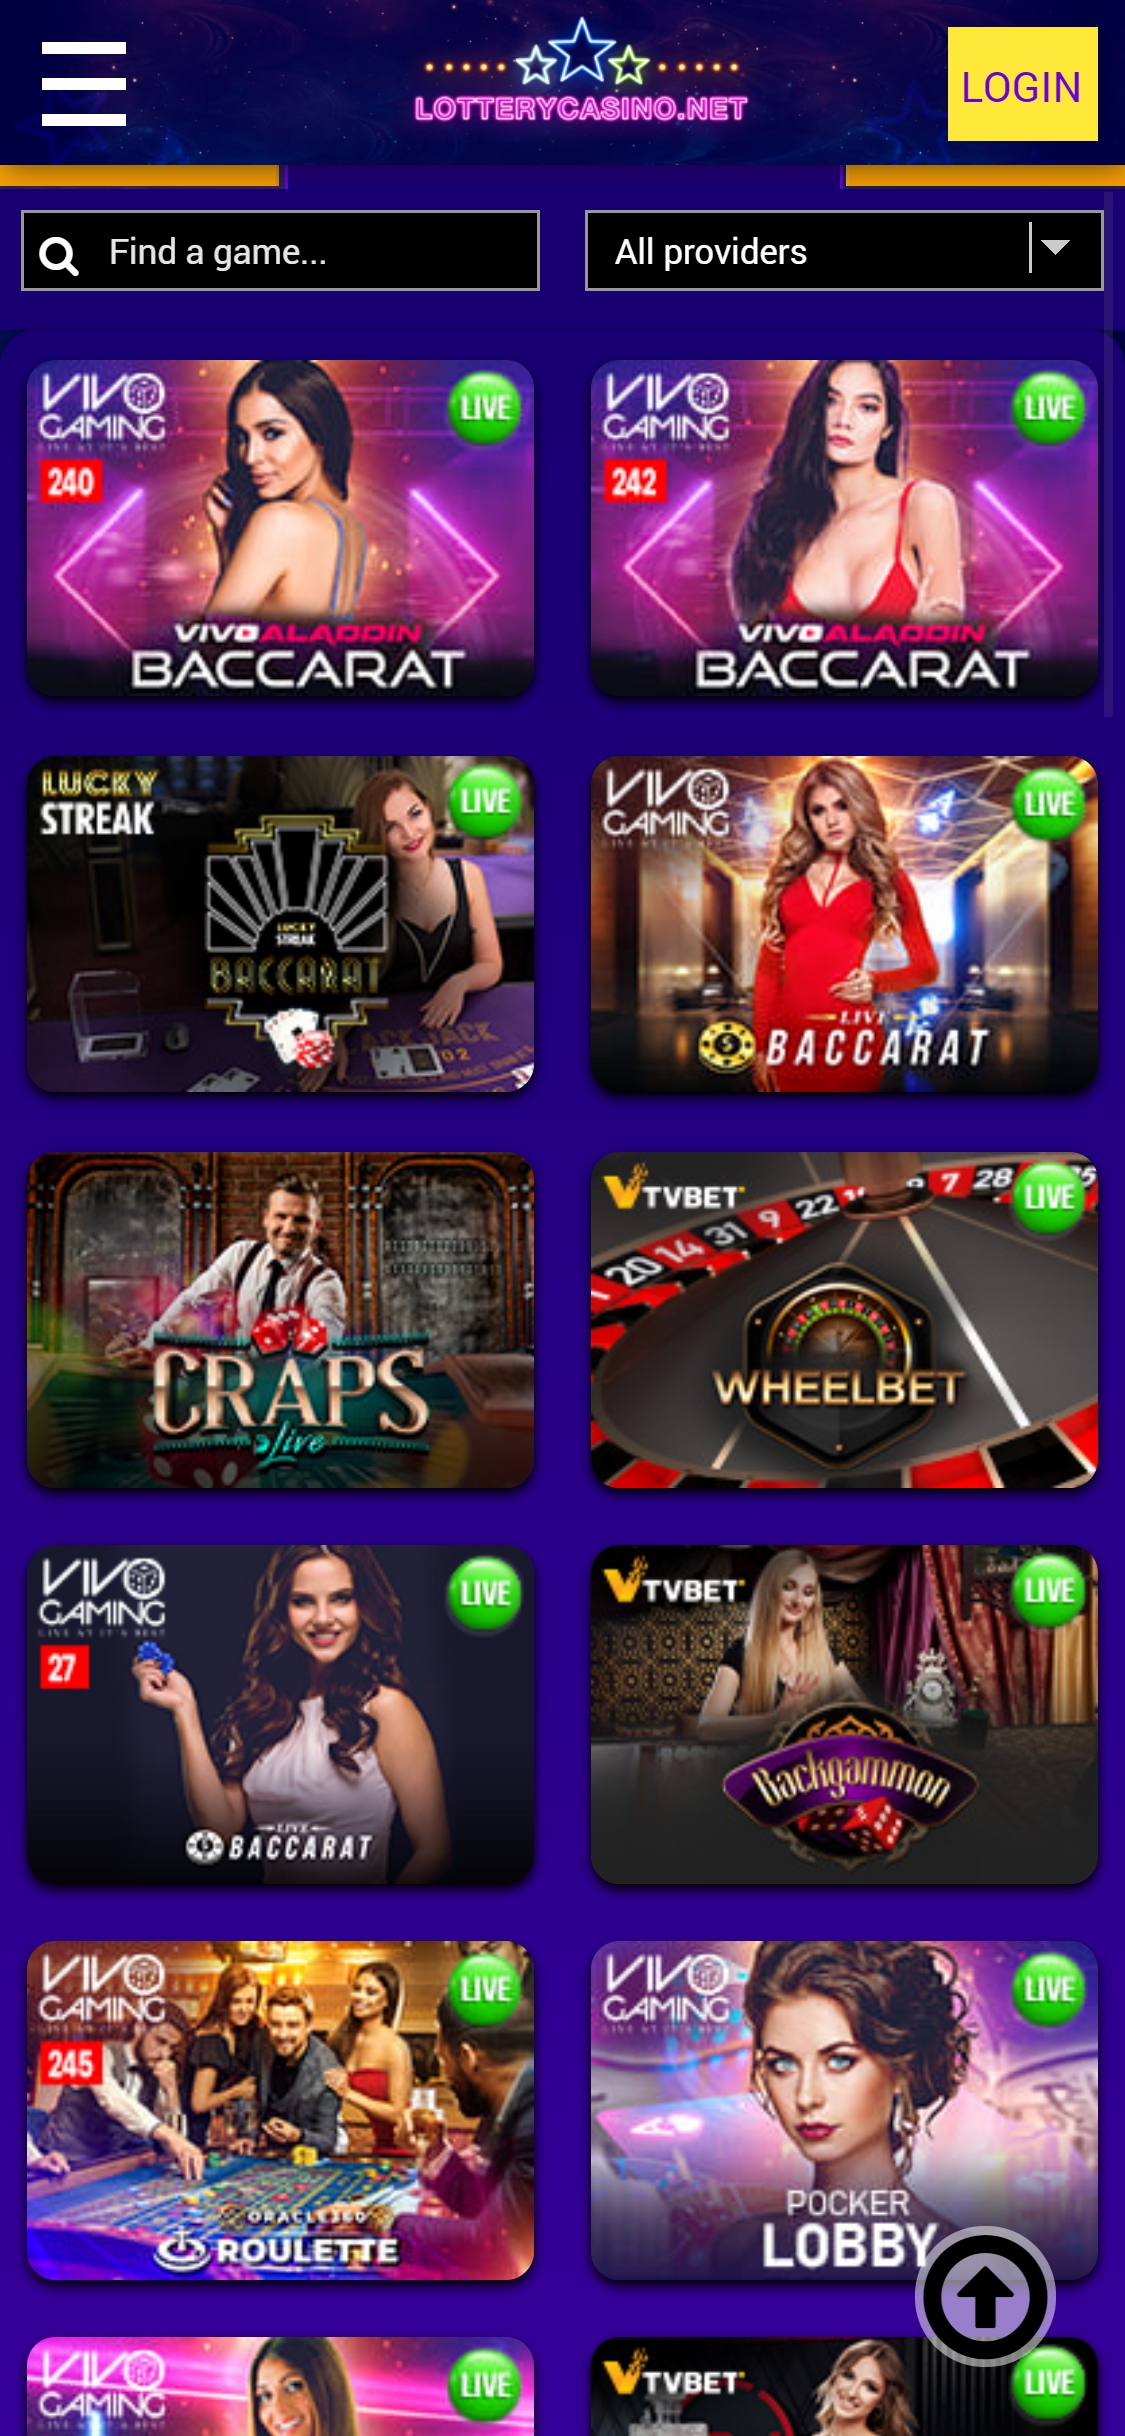 Lottery Casino Mobile Live Dealer Games Review